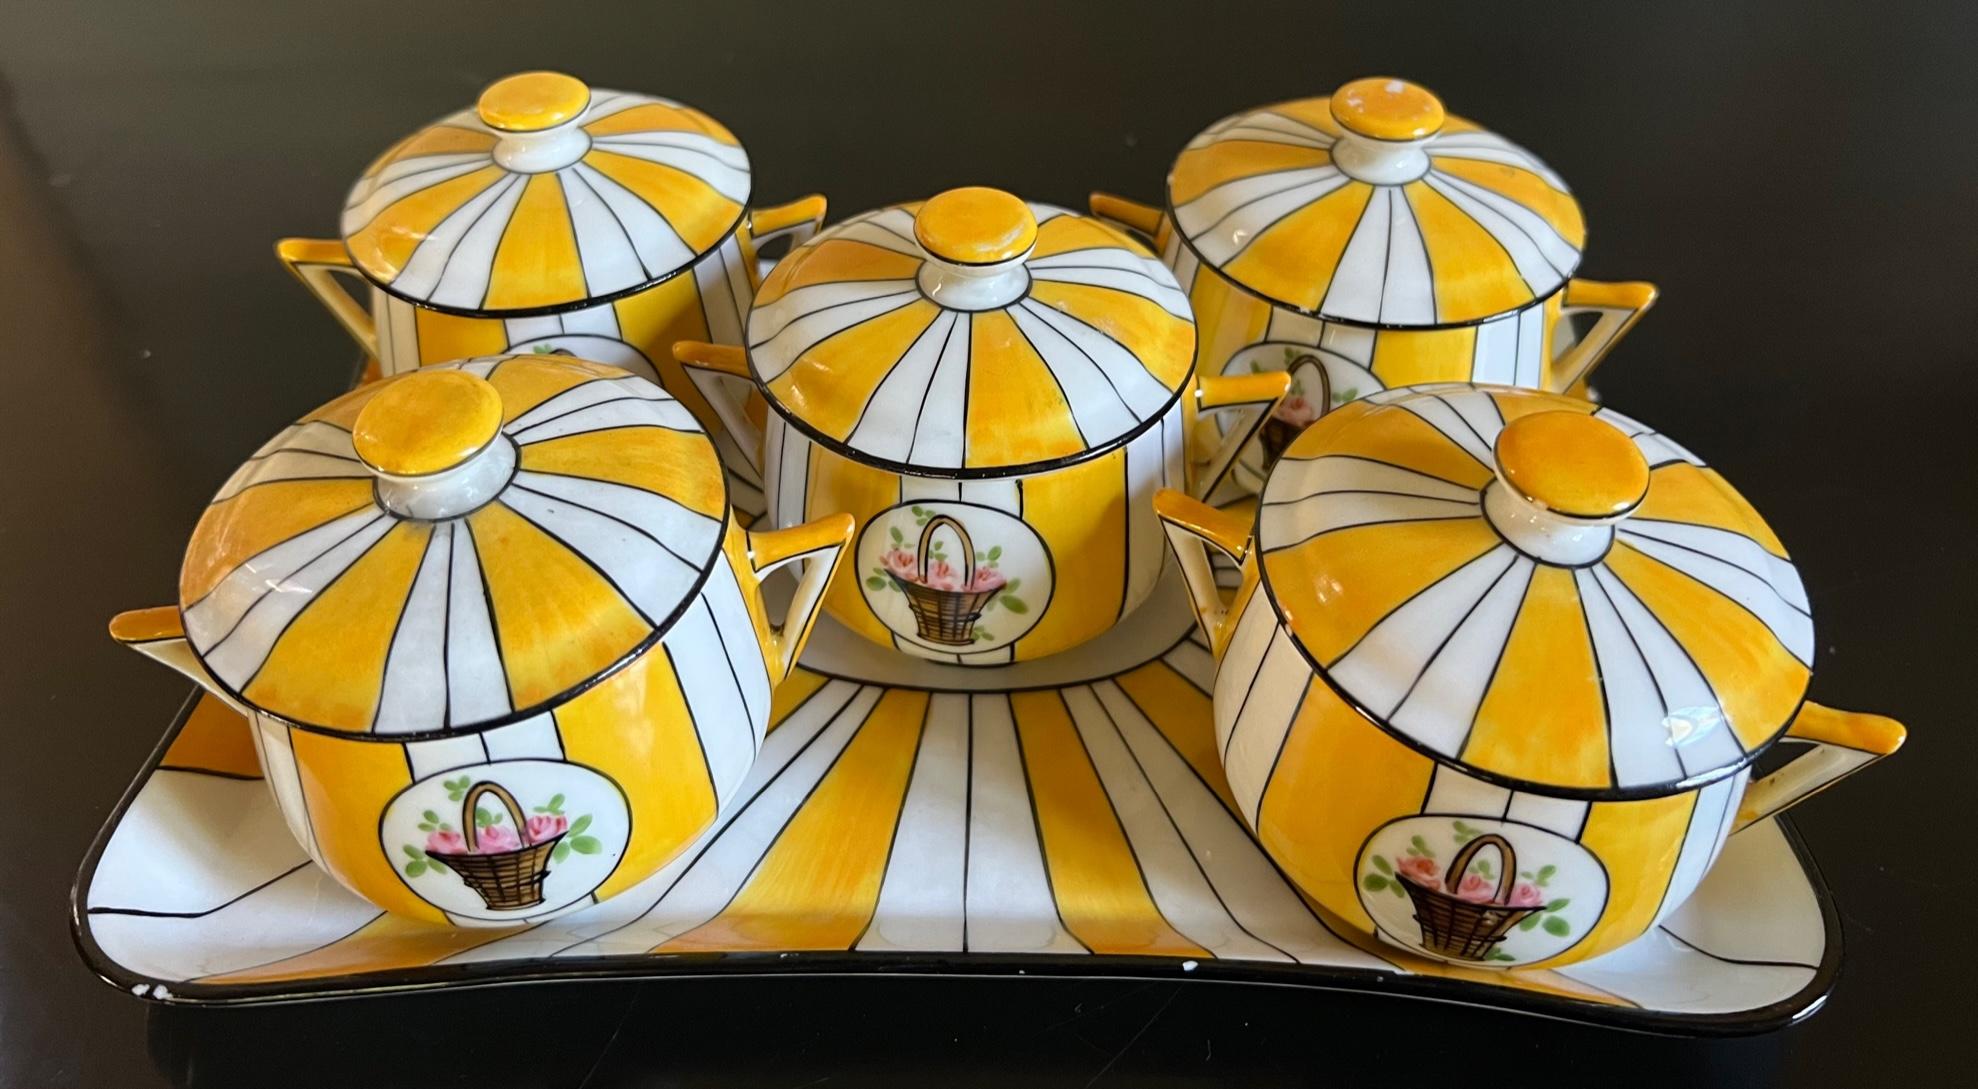 Vintage Striped Cream Pot / Dessert Set With Tray by Limoges For Sale 2